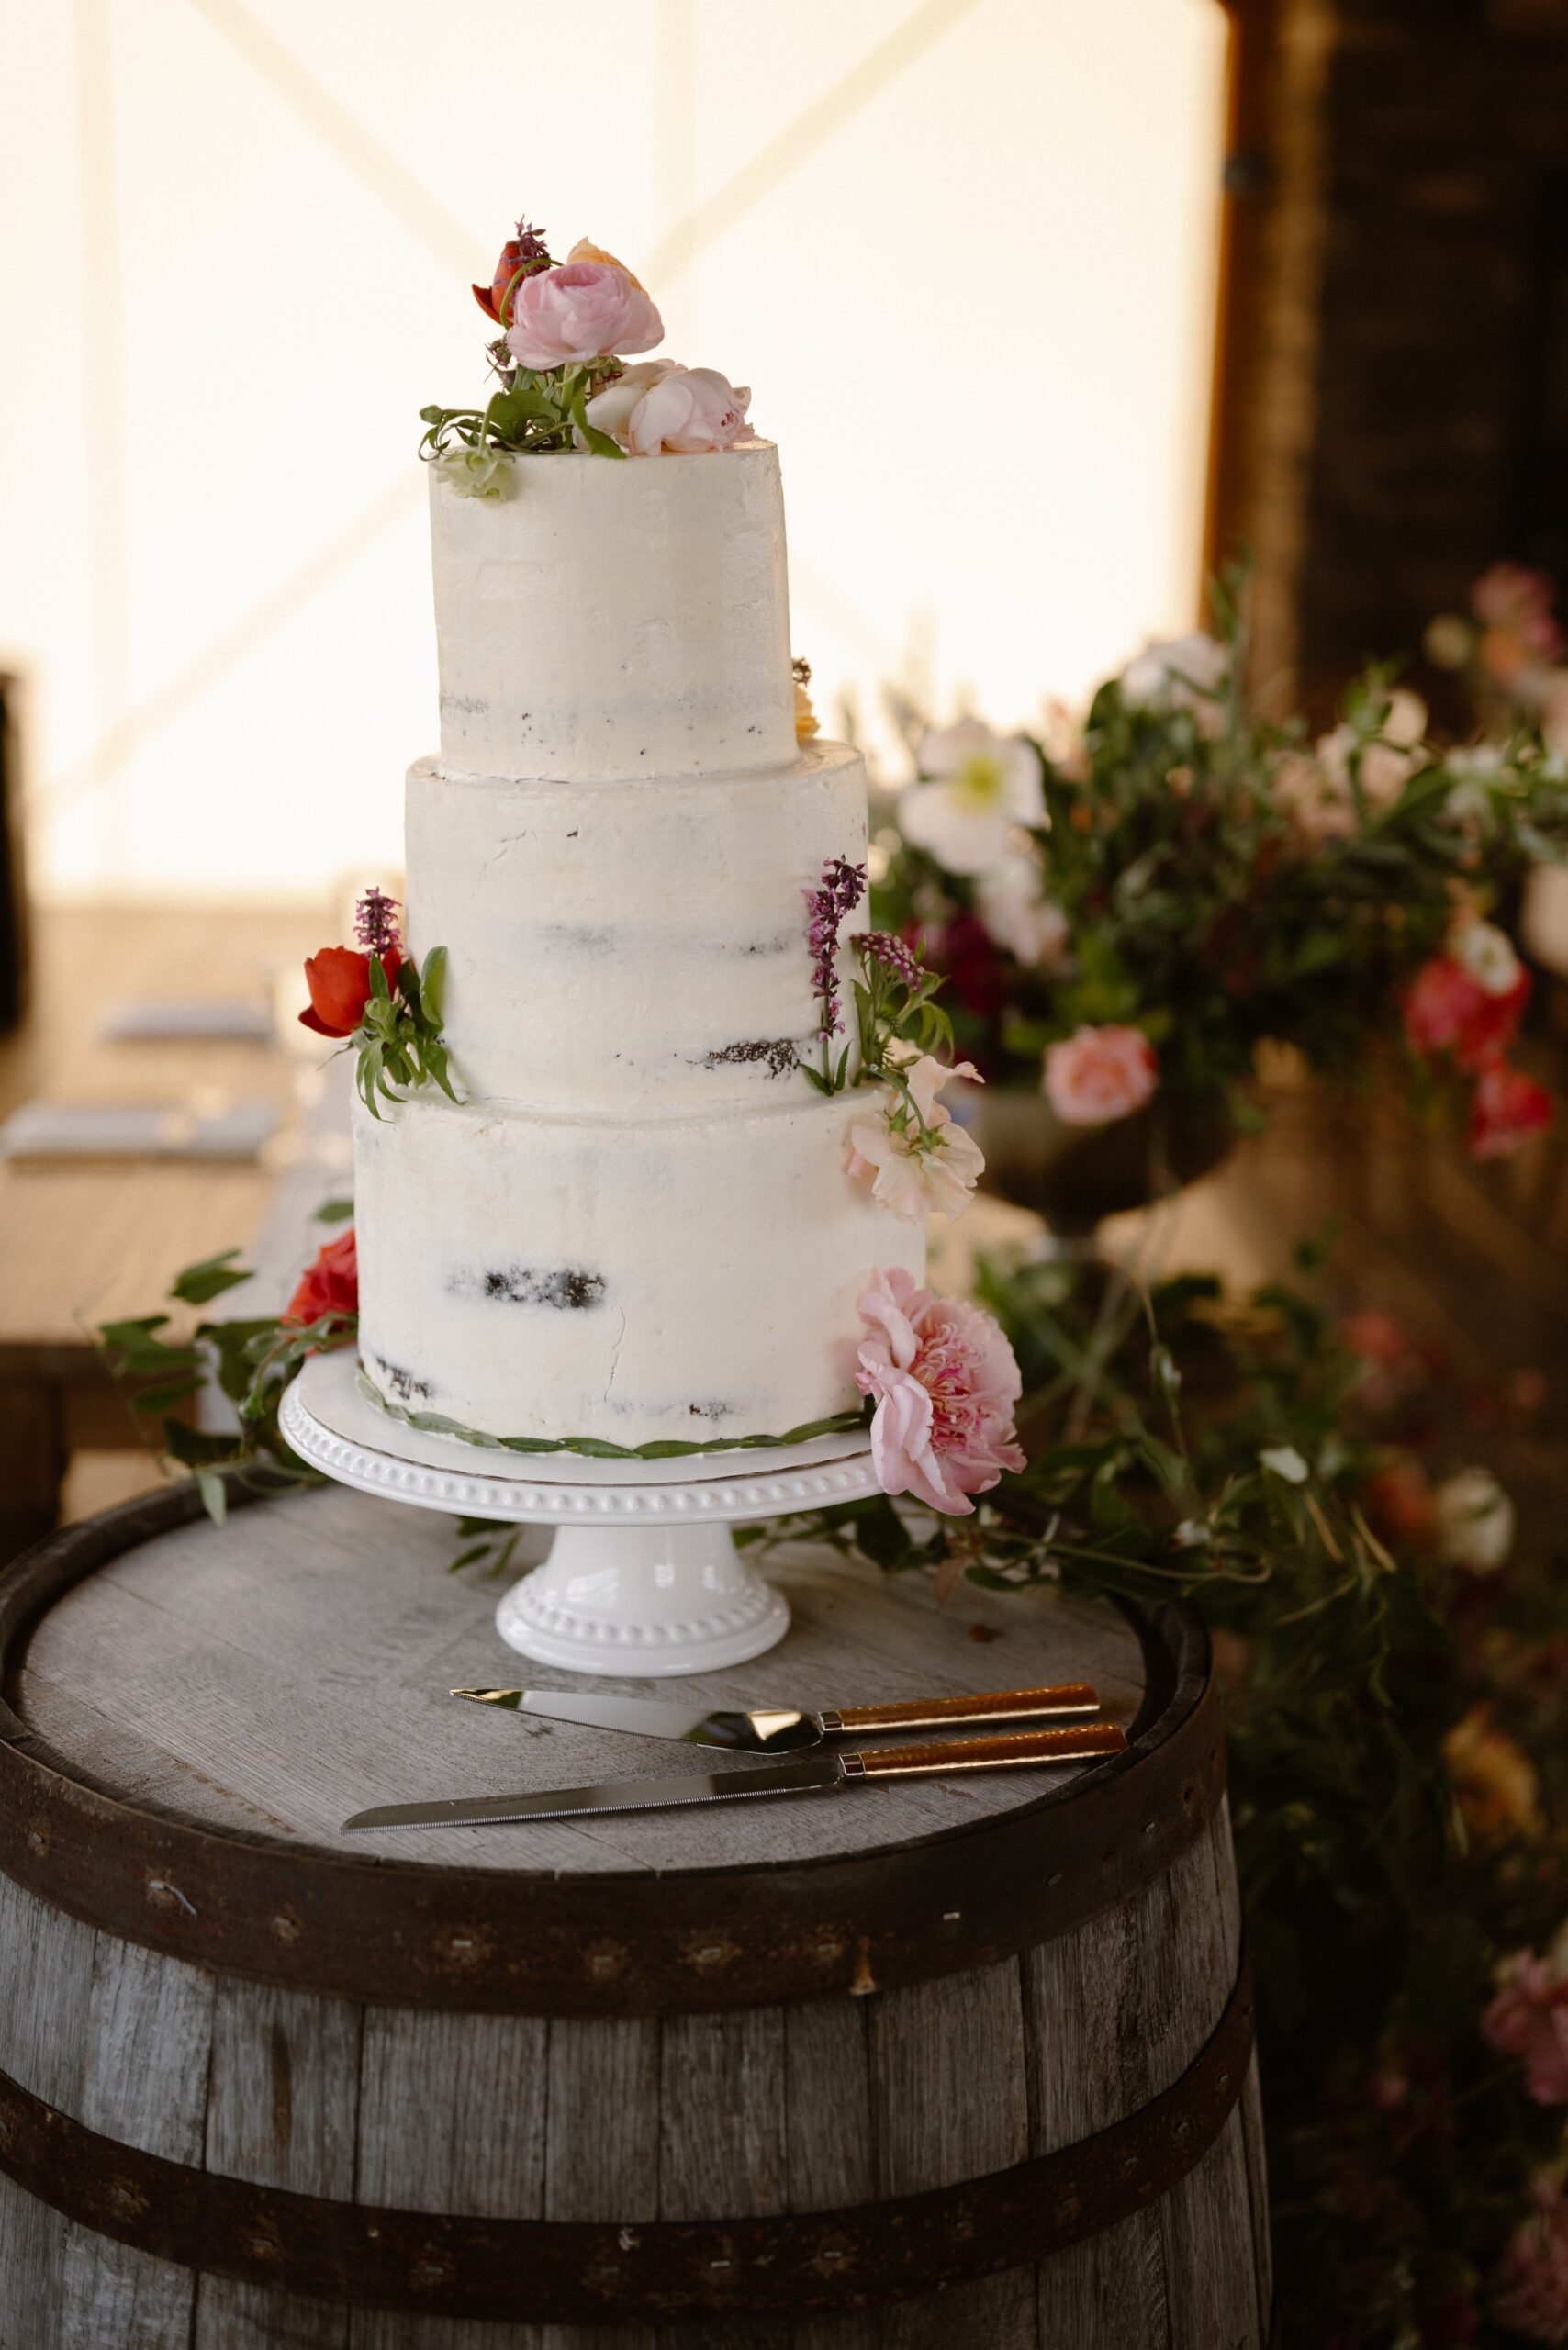 A photo of a white three tier cake at the wedding reception of Jessica and Bernard at their Three Peaks Ranch wedding. Photo by Ashley Joyce.